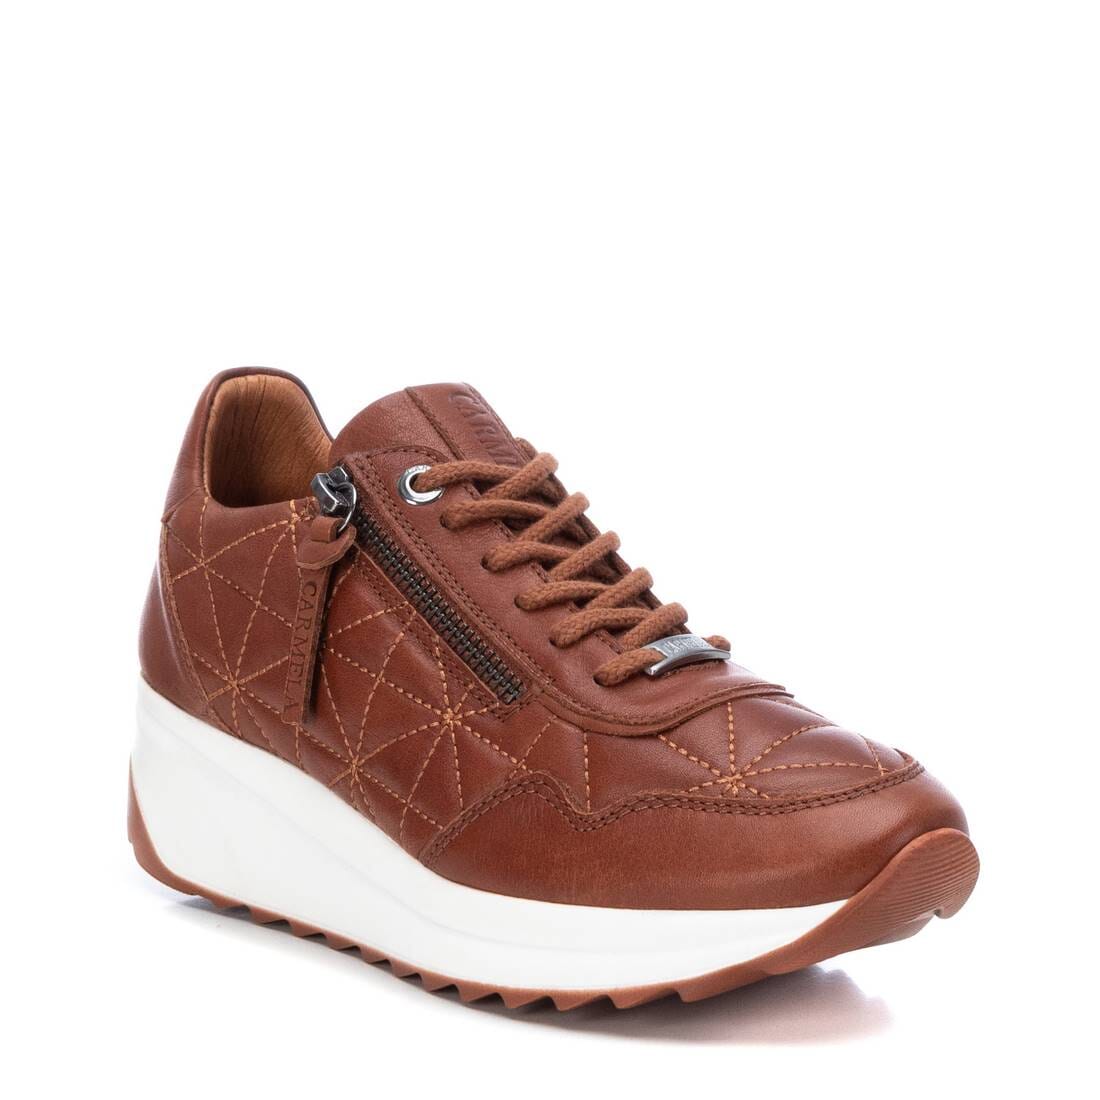 160209 Spanish Leather sneakers with quilted detail & cushion sole in Tan sneakers Sam Star shoes 